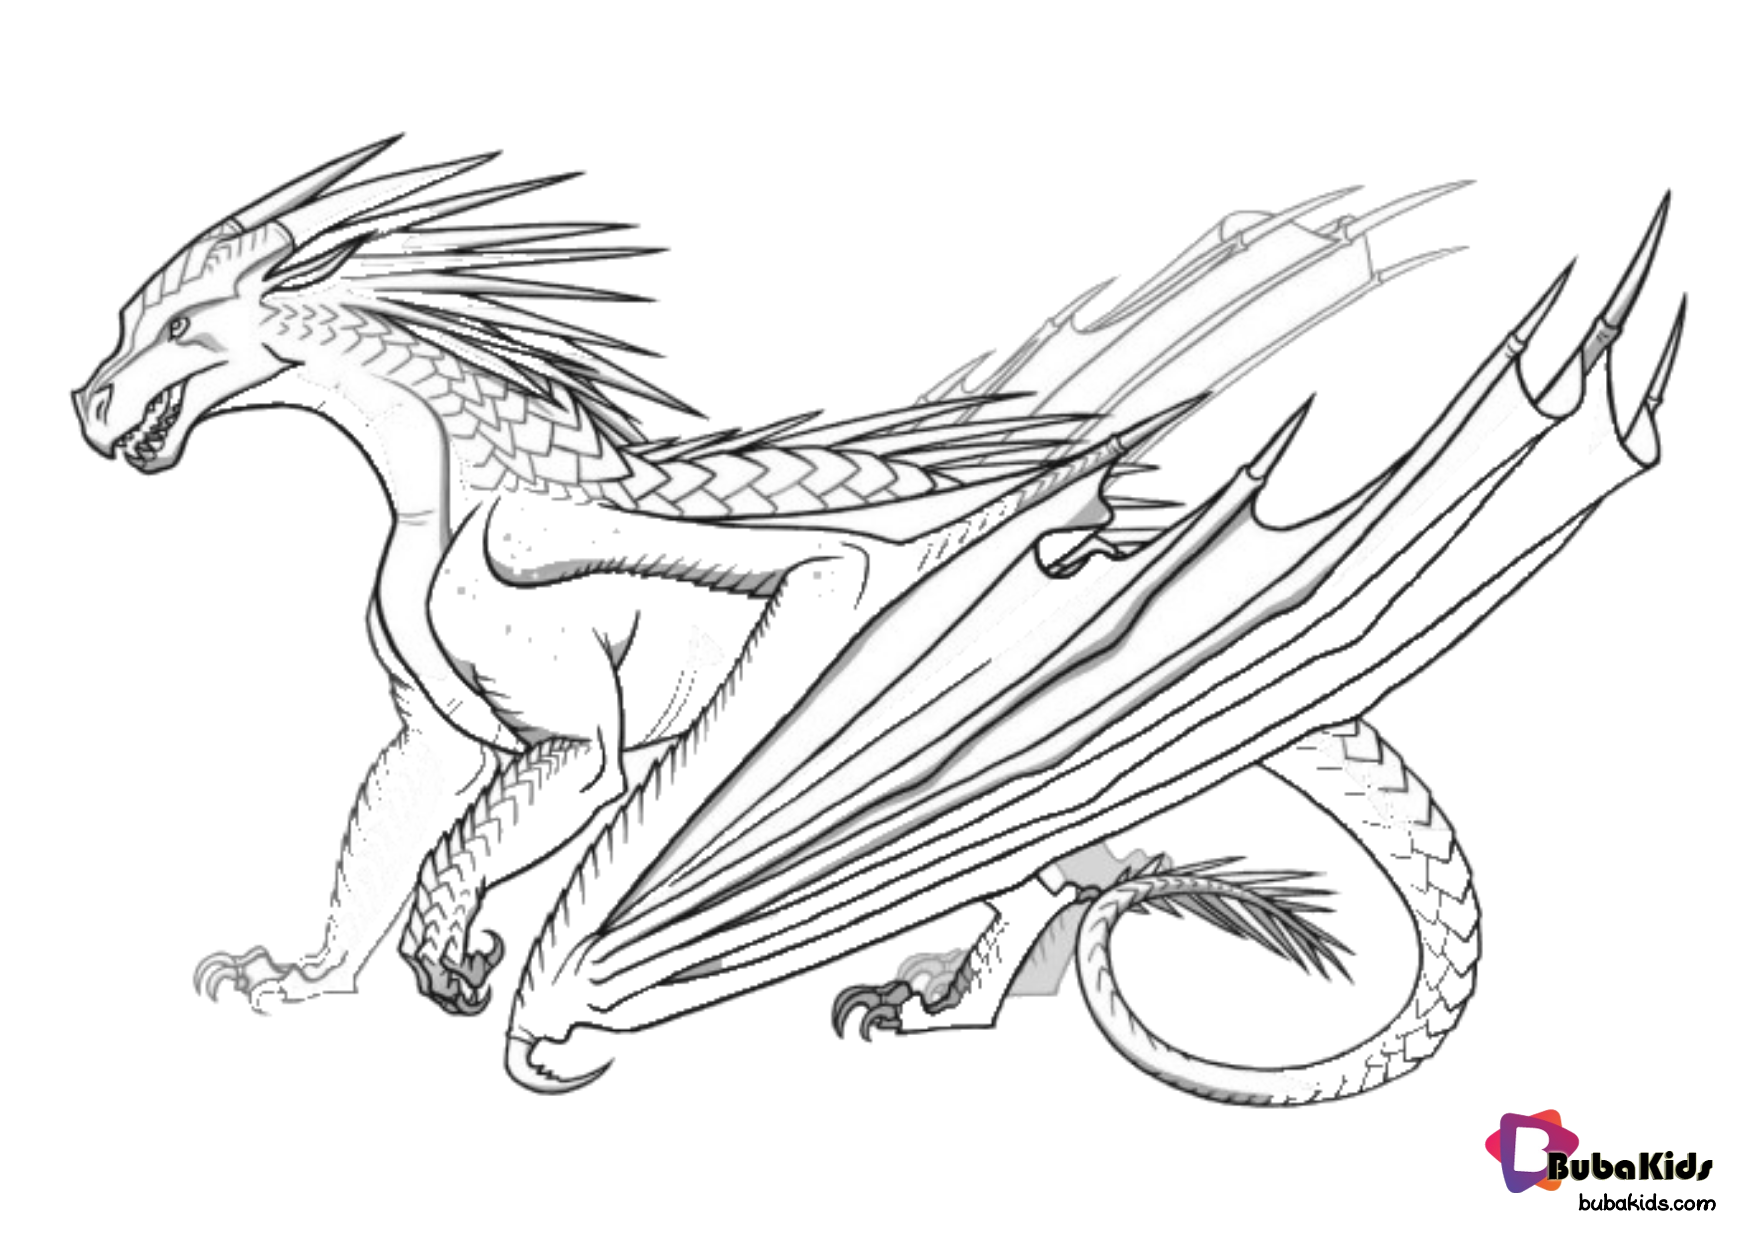 Free download to print dragon legendary creatures coloring page. Wallpaper